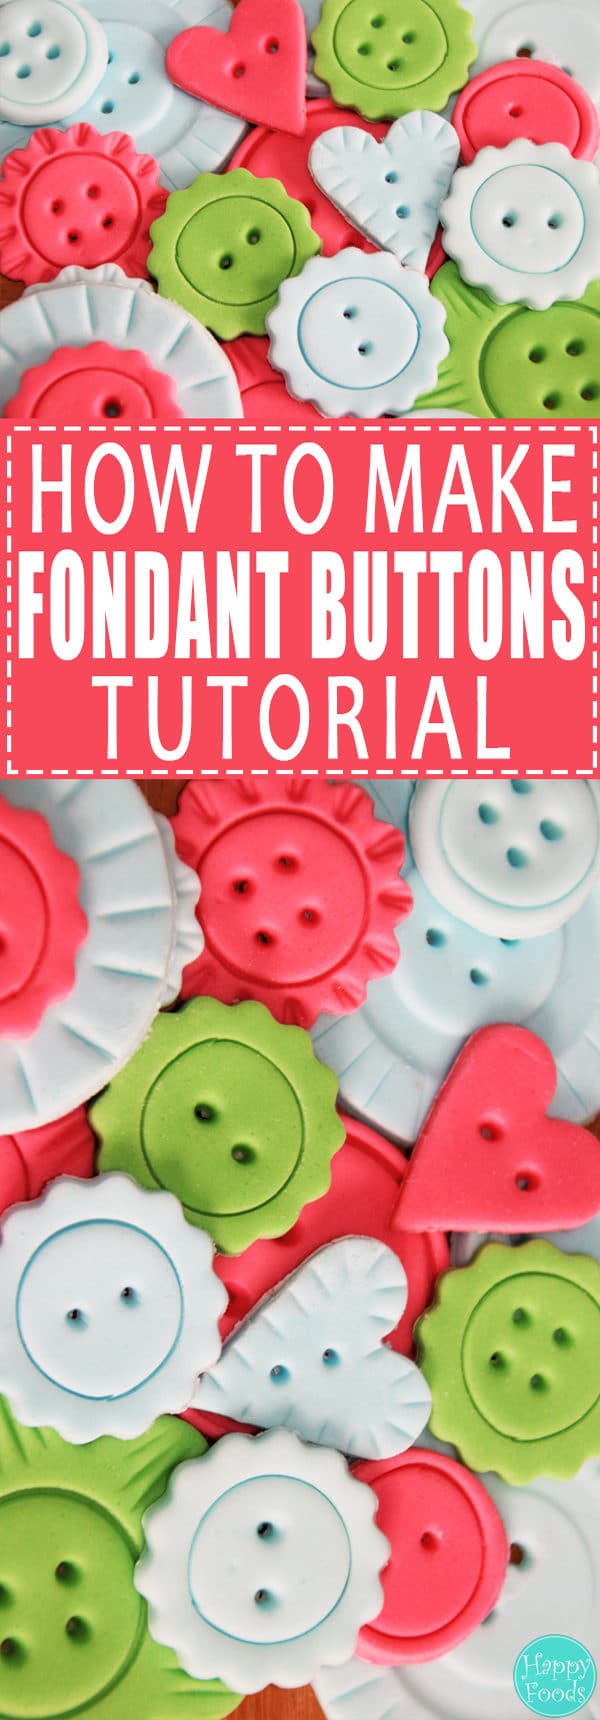 How to Make Fondant Buttons - Easy cake decorating tutorial! | happyfoodstube.com